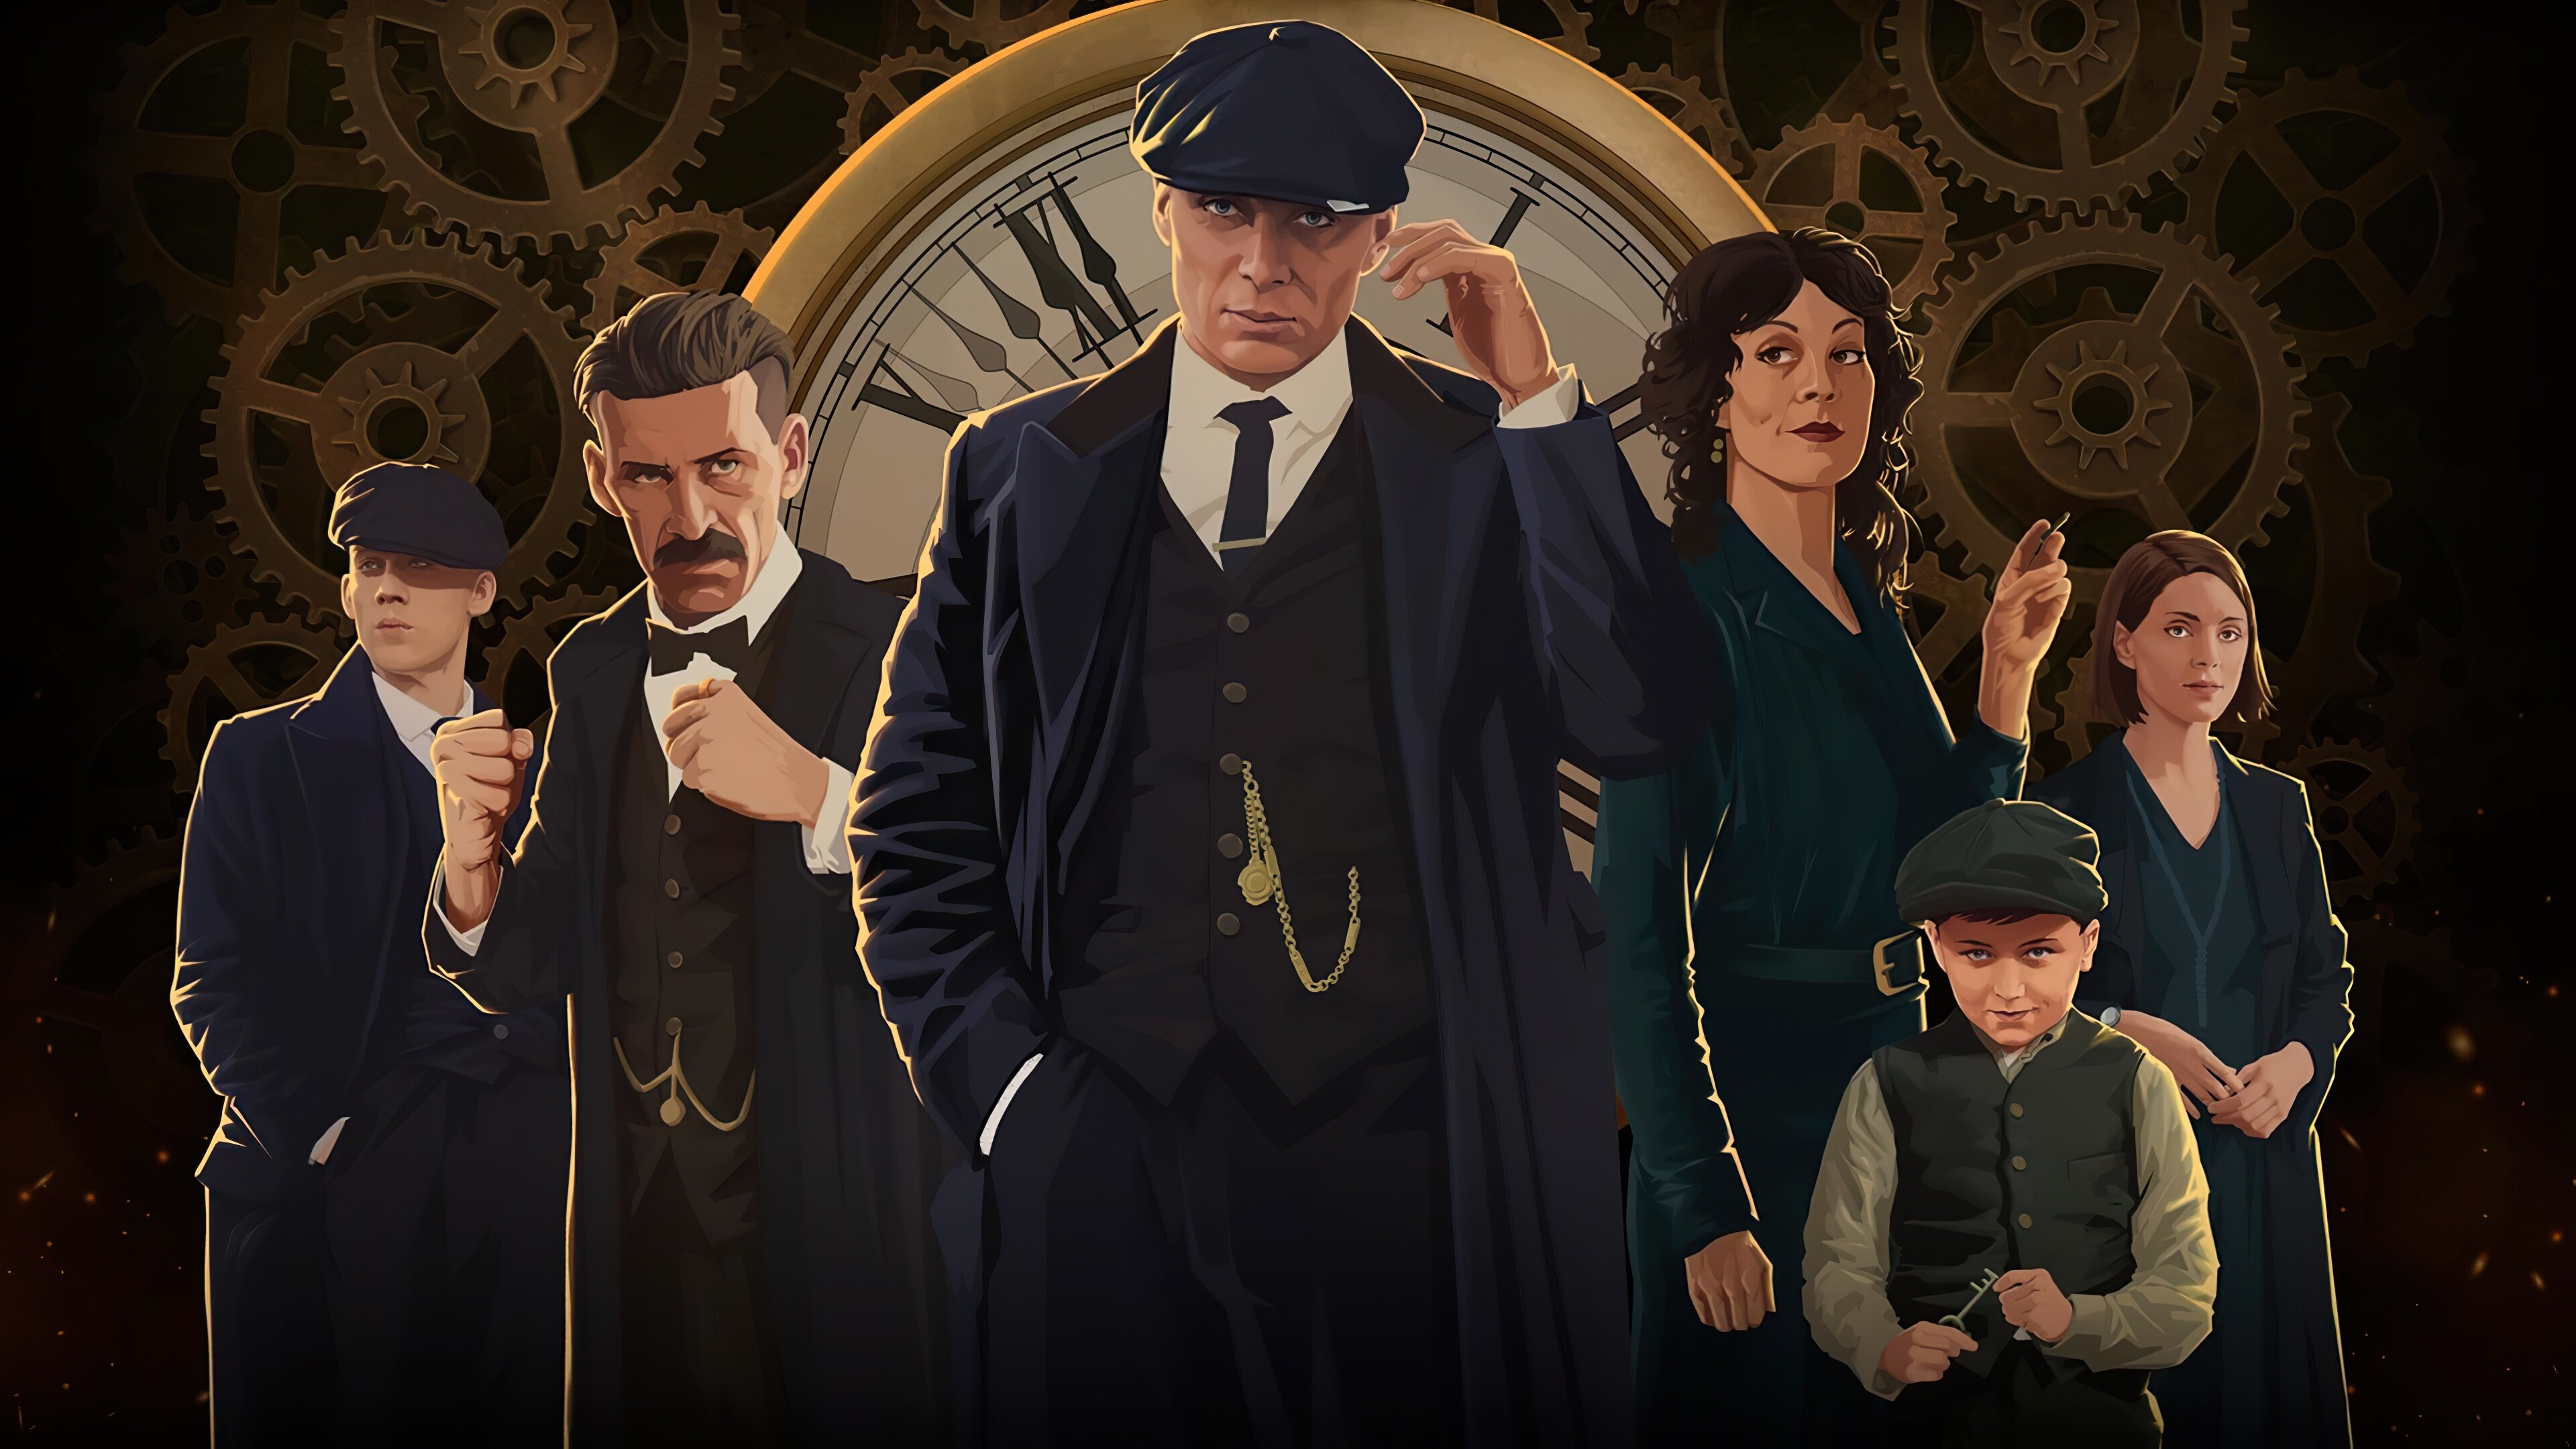 Peaky Blinders: A British period crime drama television series created by Steven Knight. 3840x2160 4K Wallpaper.